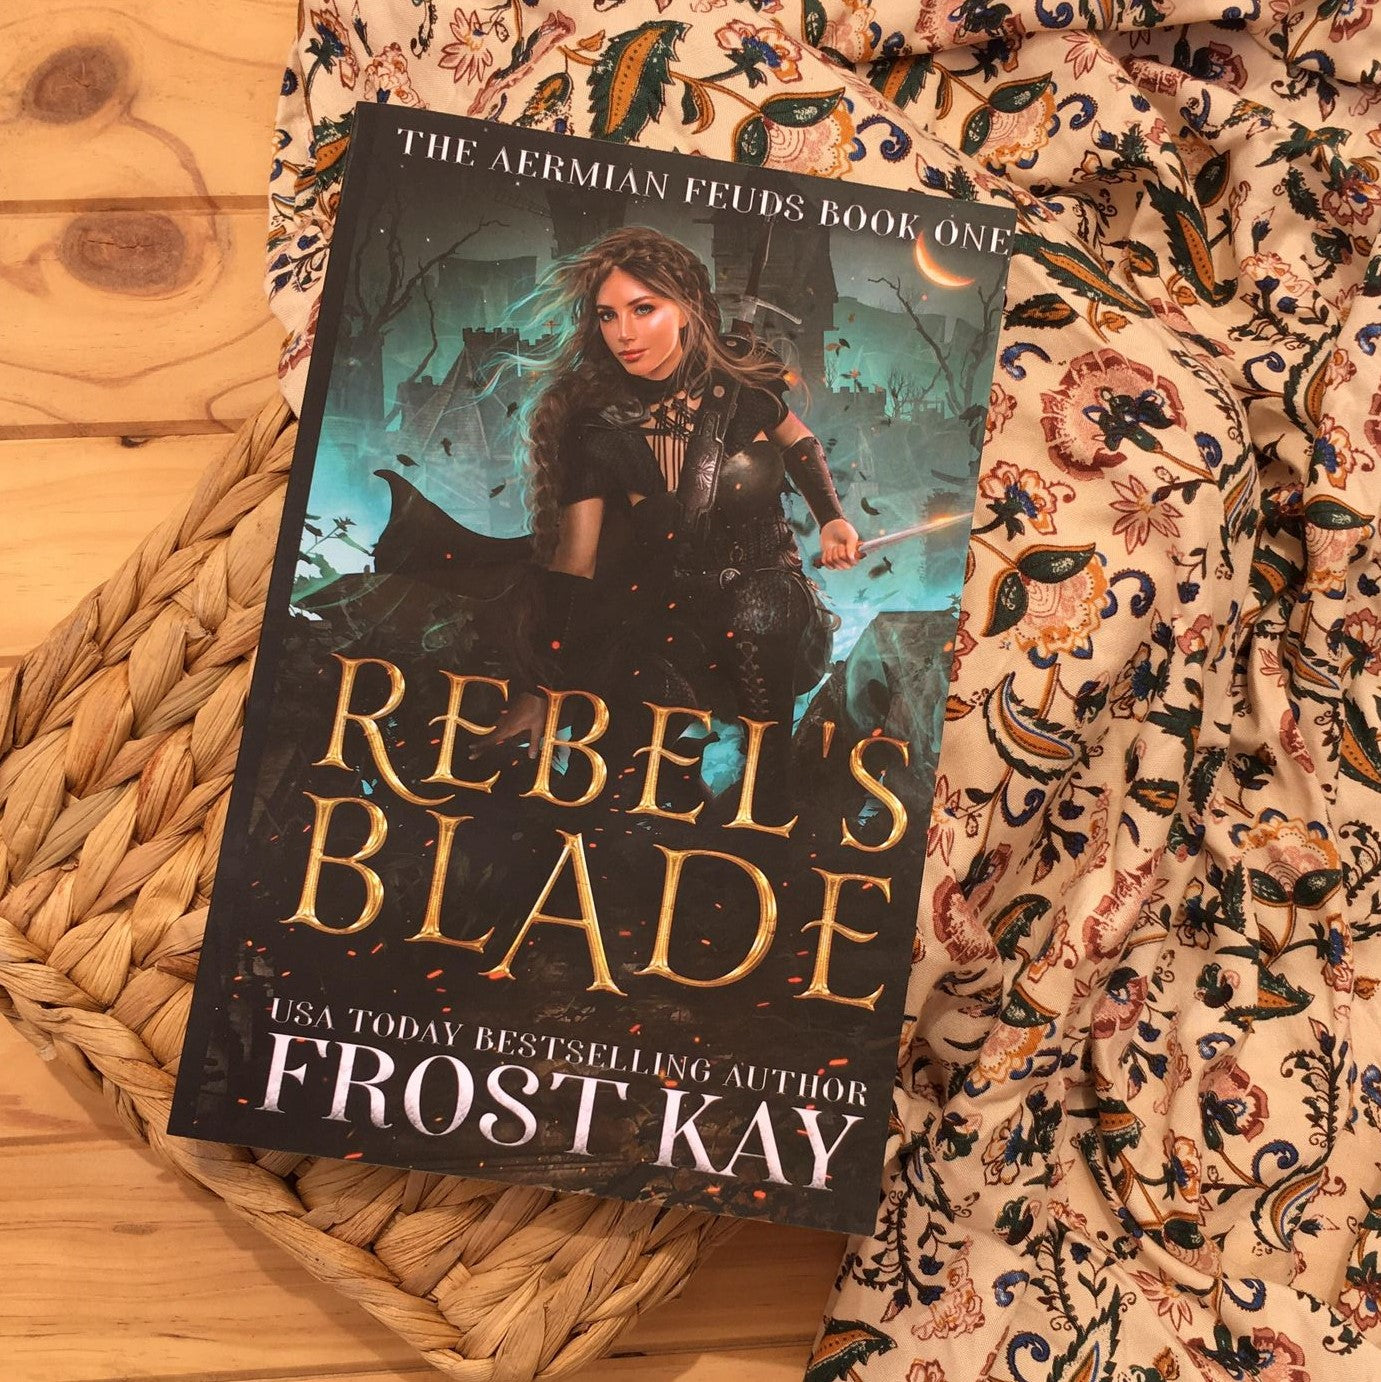 The Aermian Feuds series by Frost Kay